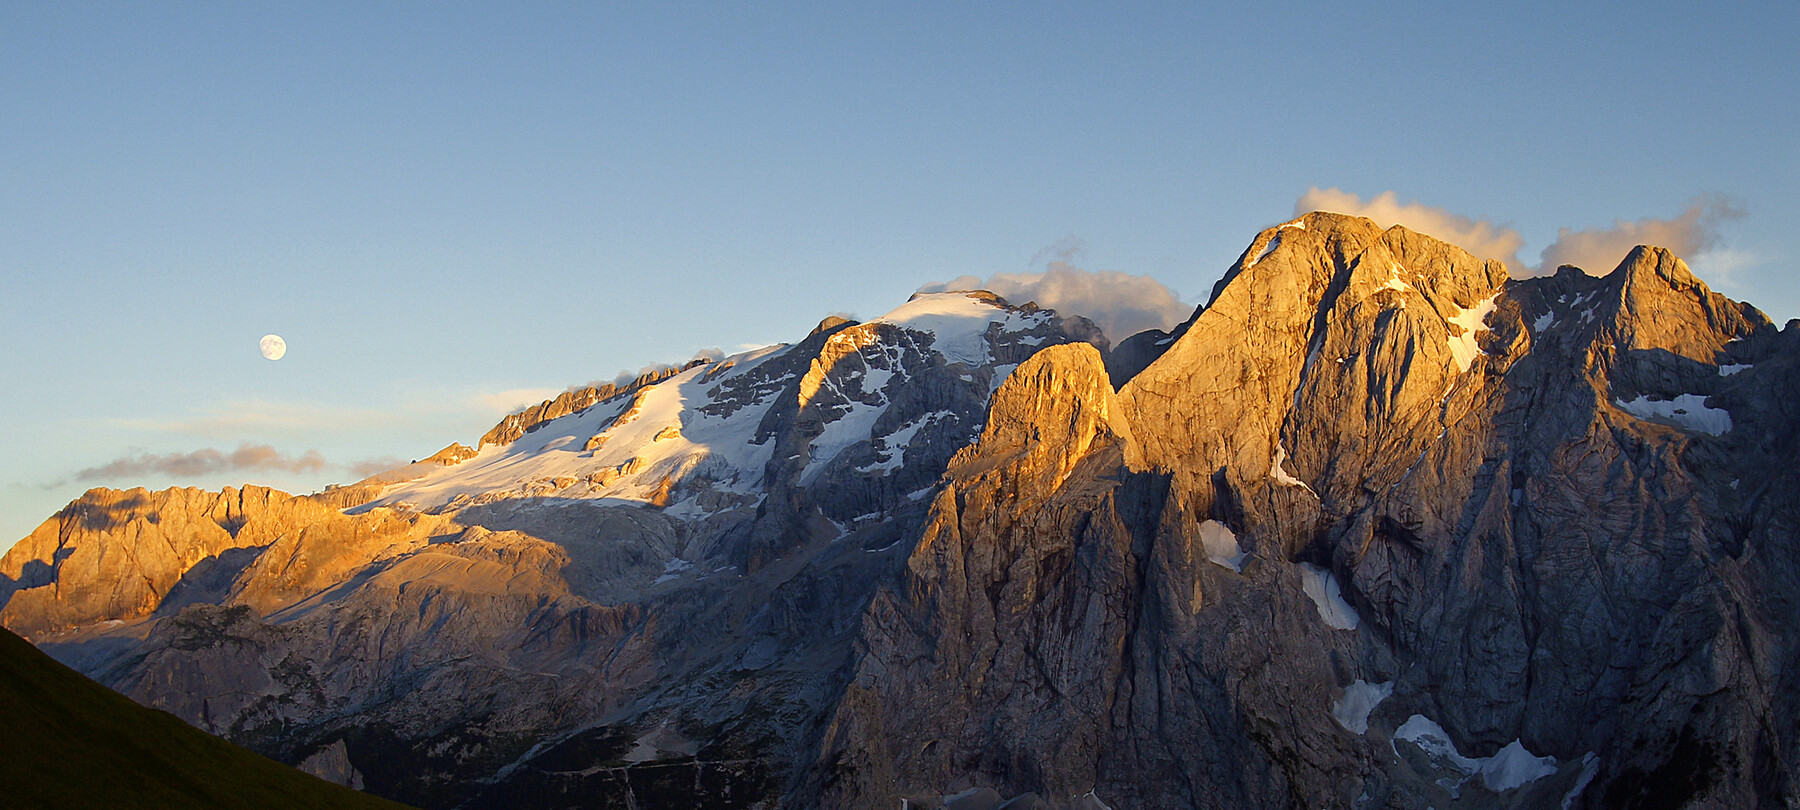 The Dolomites and its adventures: exploring the Marmolada